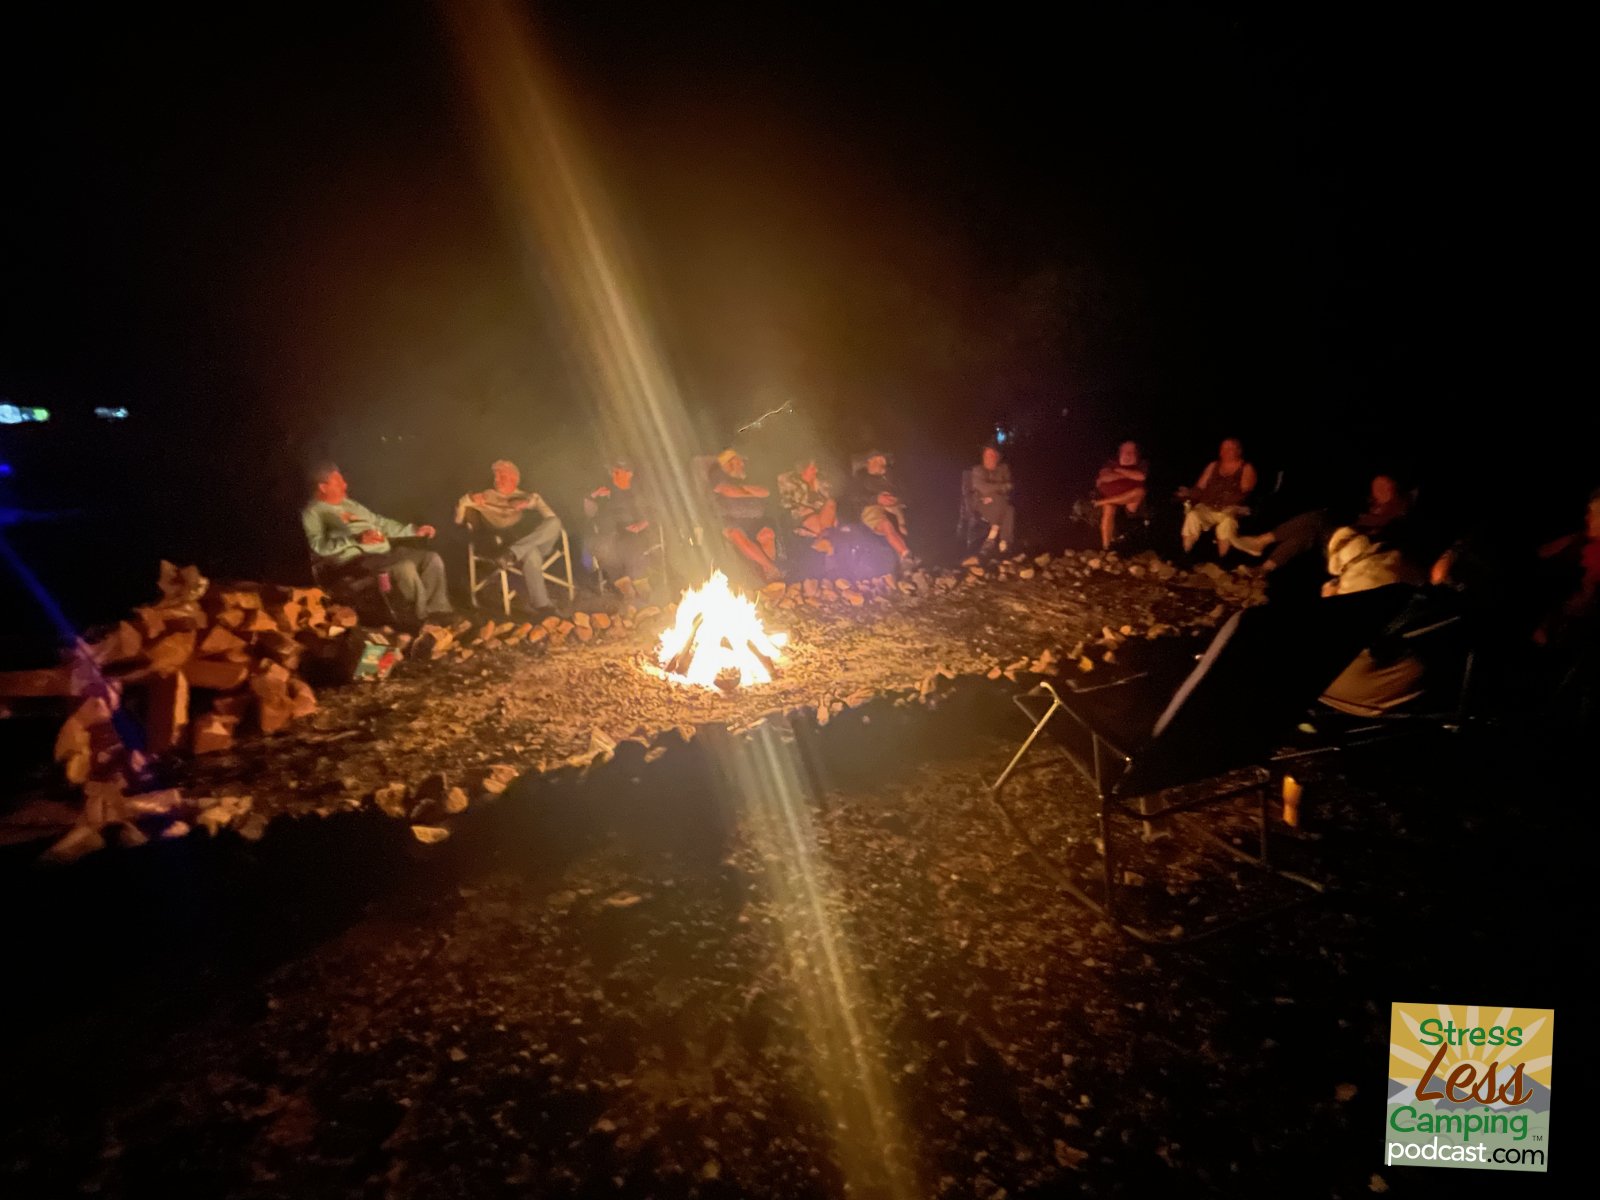 Nightly campfires have been a great way to shared tips trick ideas and destinations at the gathering.jpg